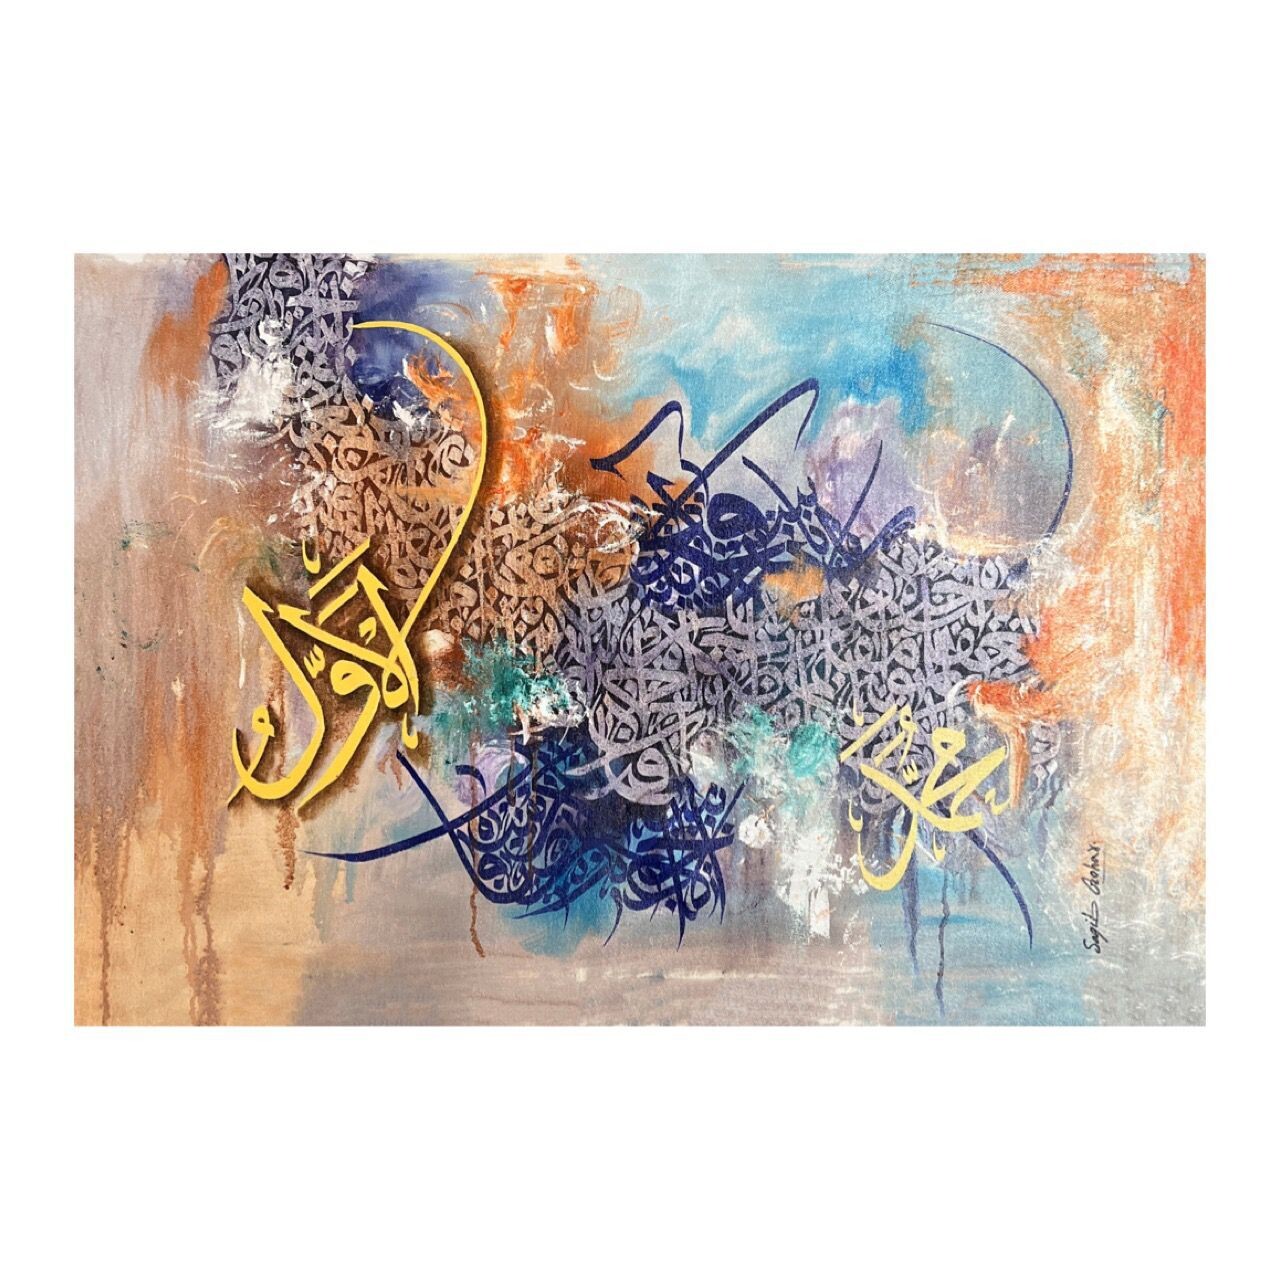 Muhammad, The First - abstract calligraphy oil painting